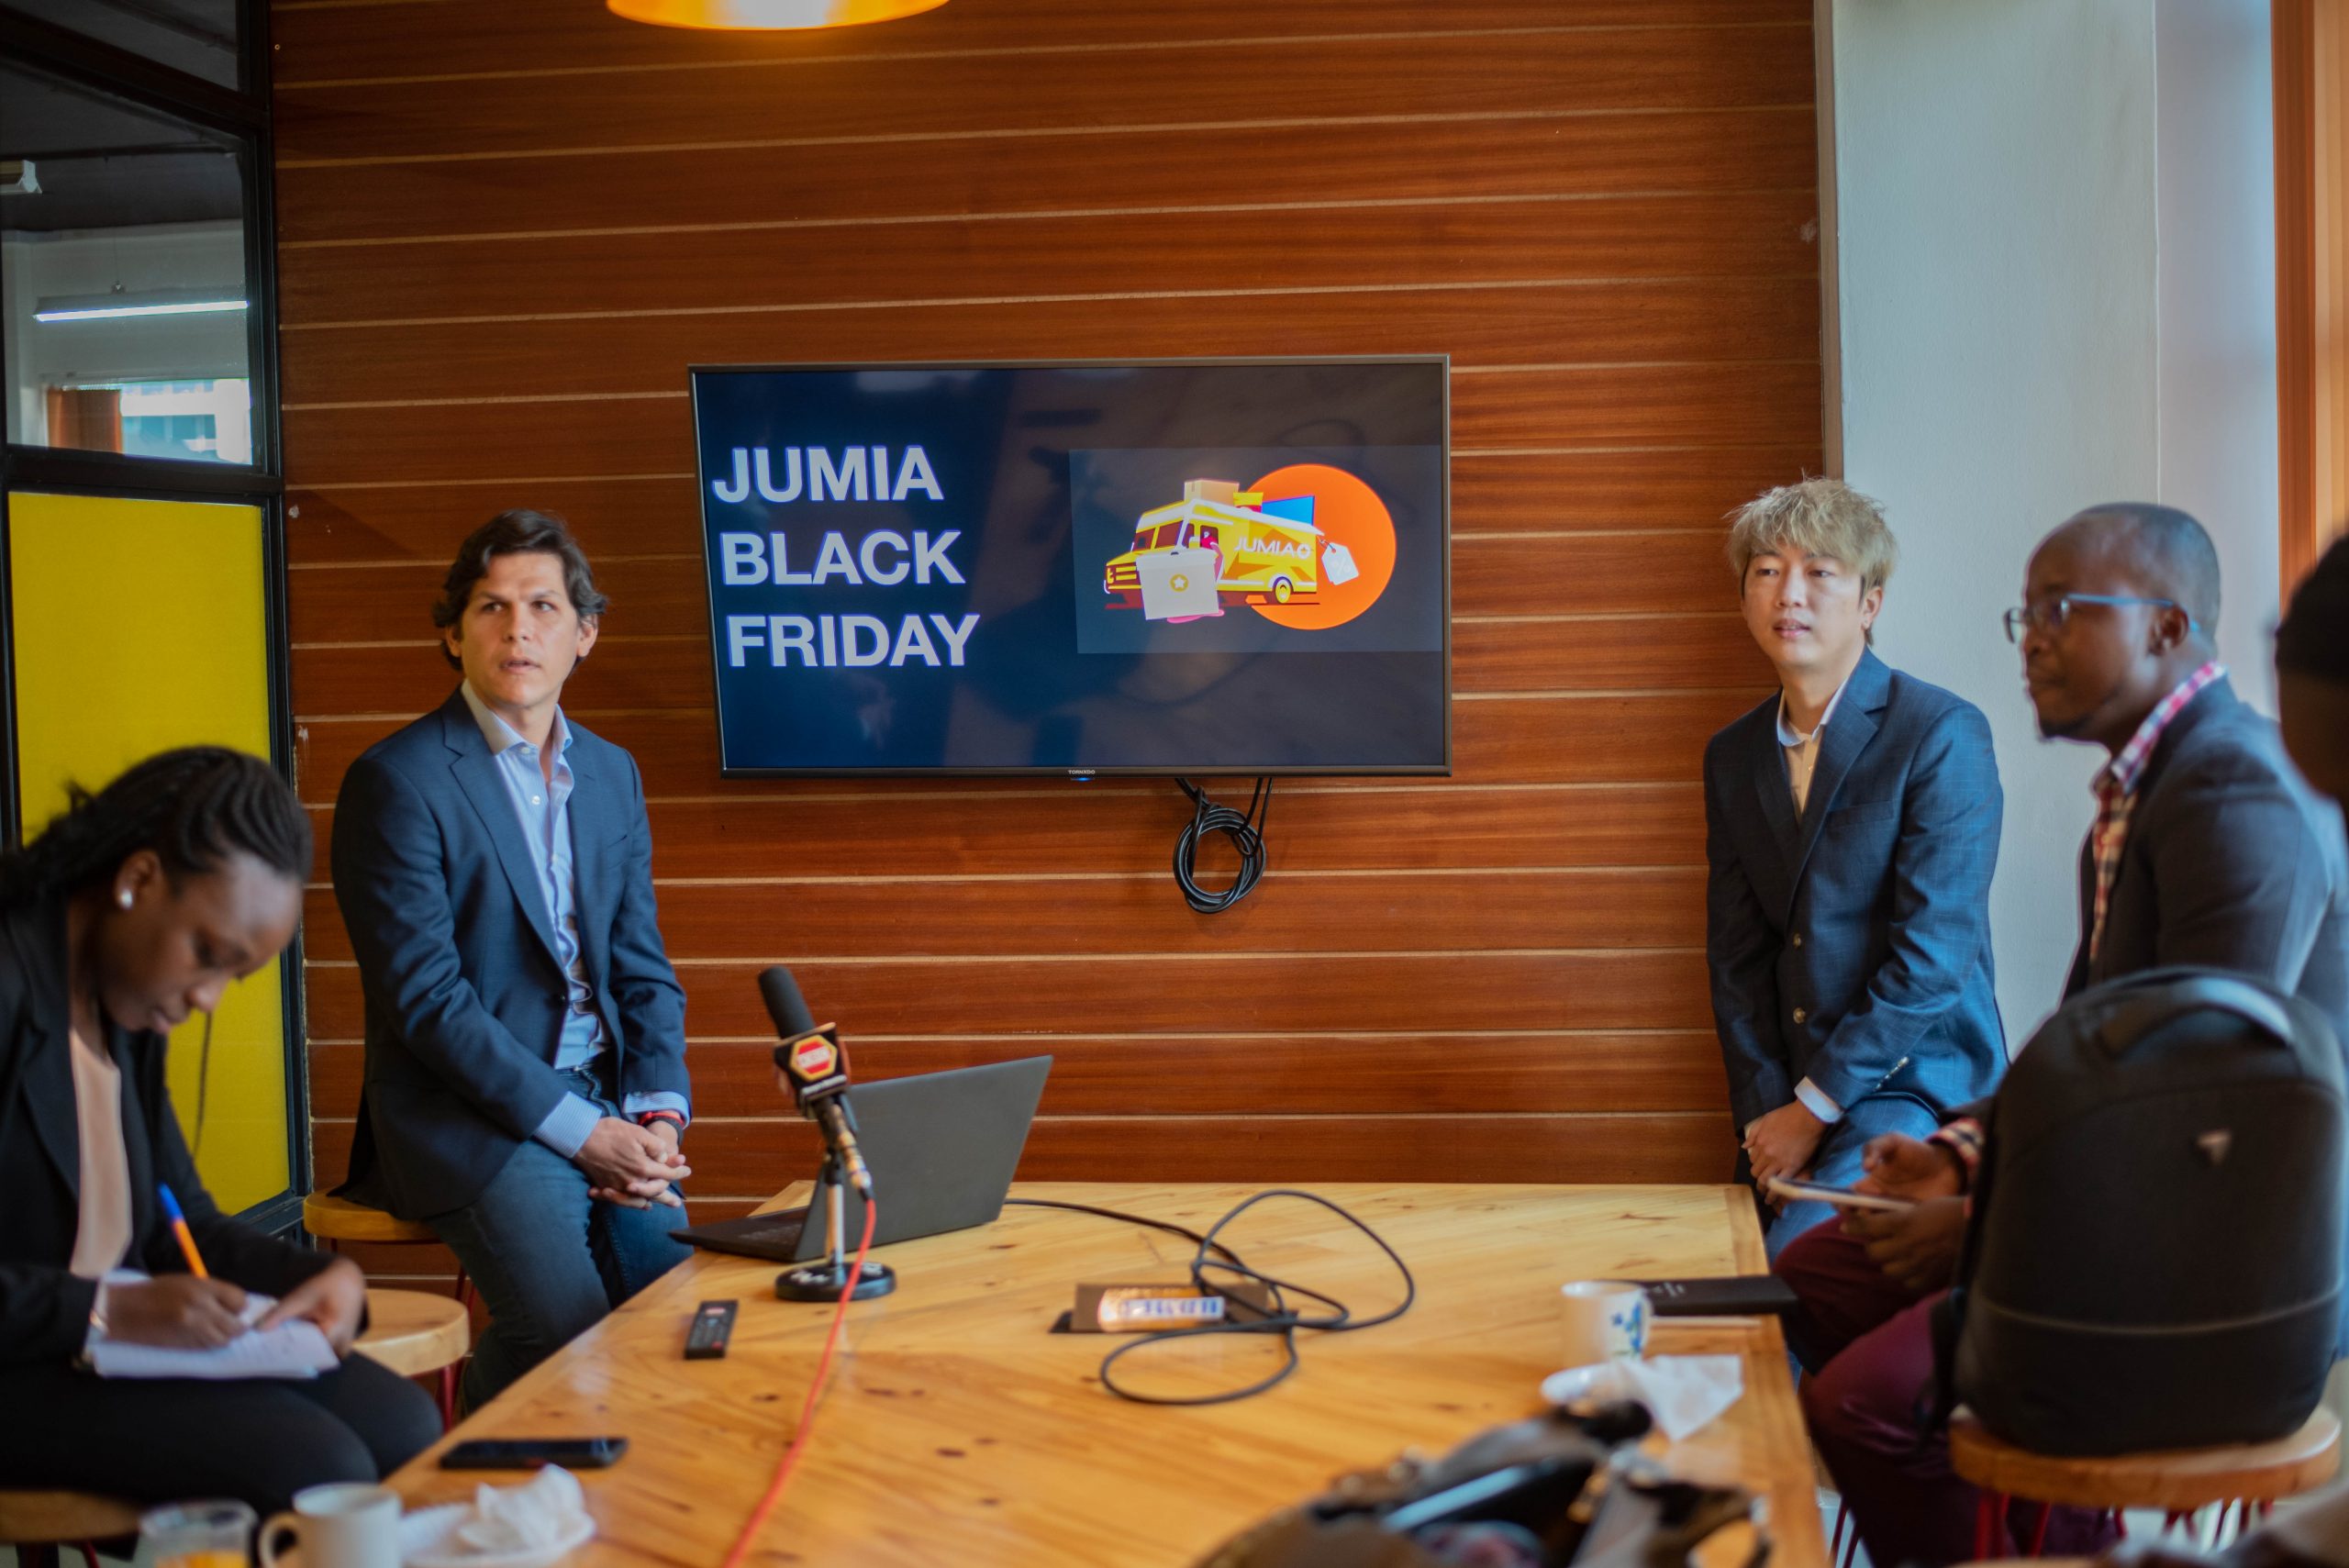 Jumia Kenya CEO, Juan Seco (left) and Transsion Holdings Regional Manager Ray Fang (Right) during the launch of Jumia Black Friday at Jumia Offices in Westlands.